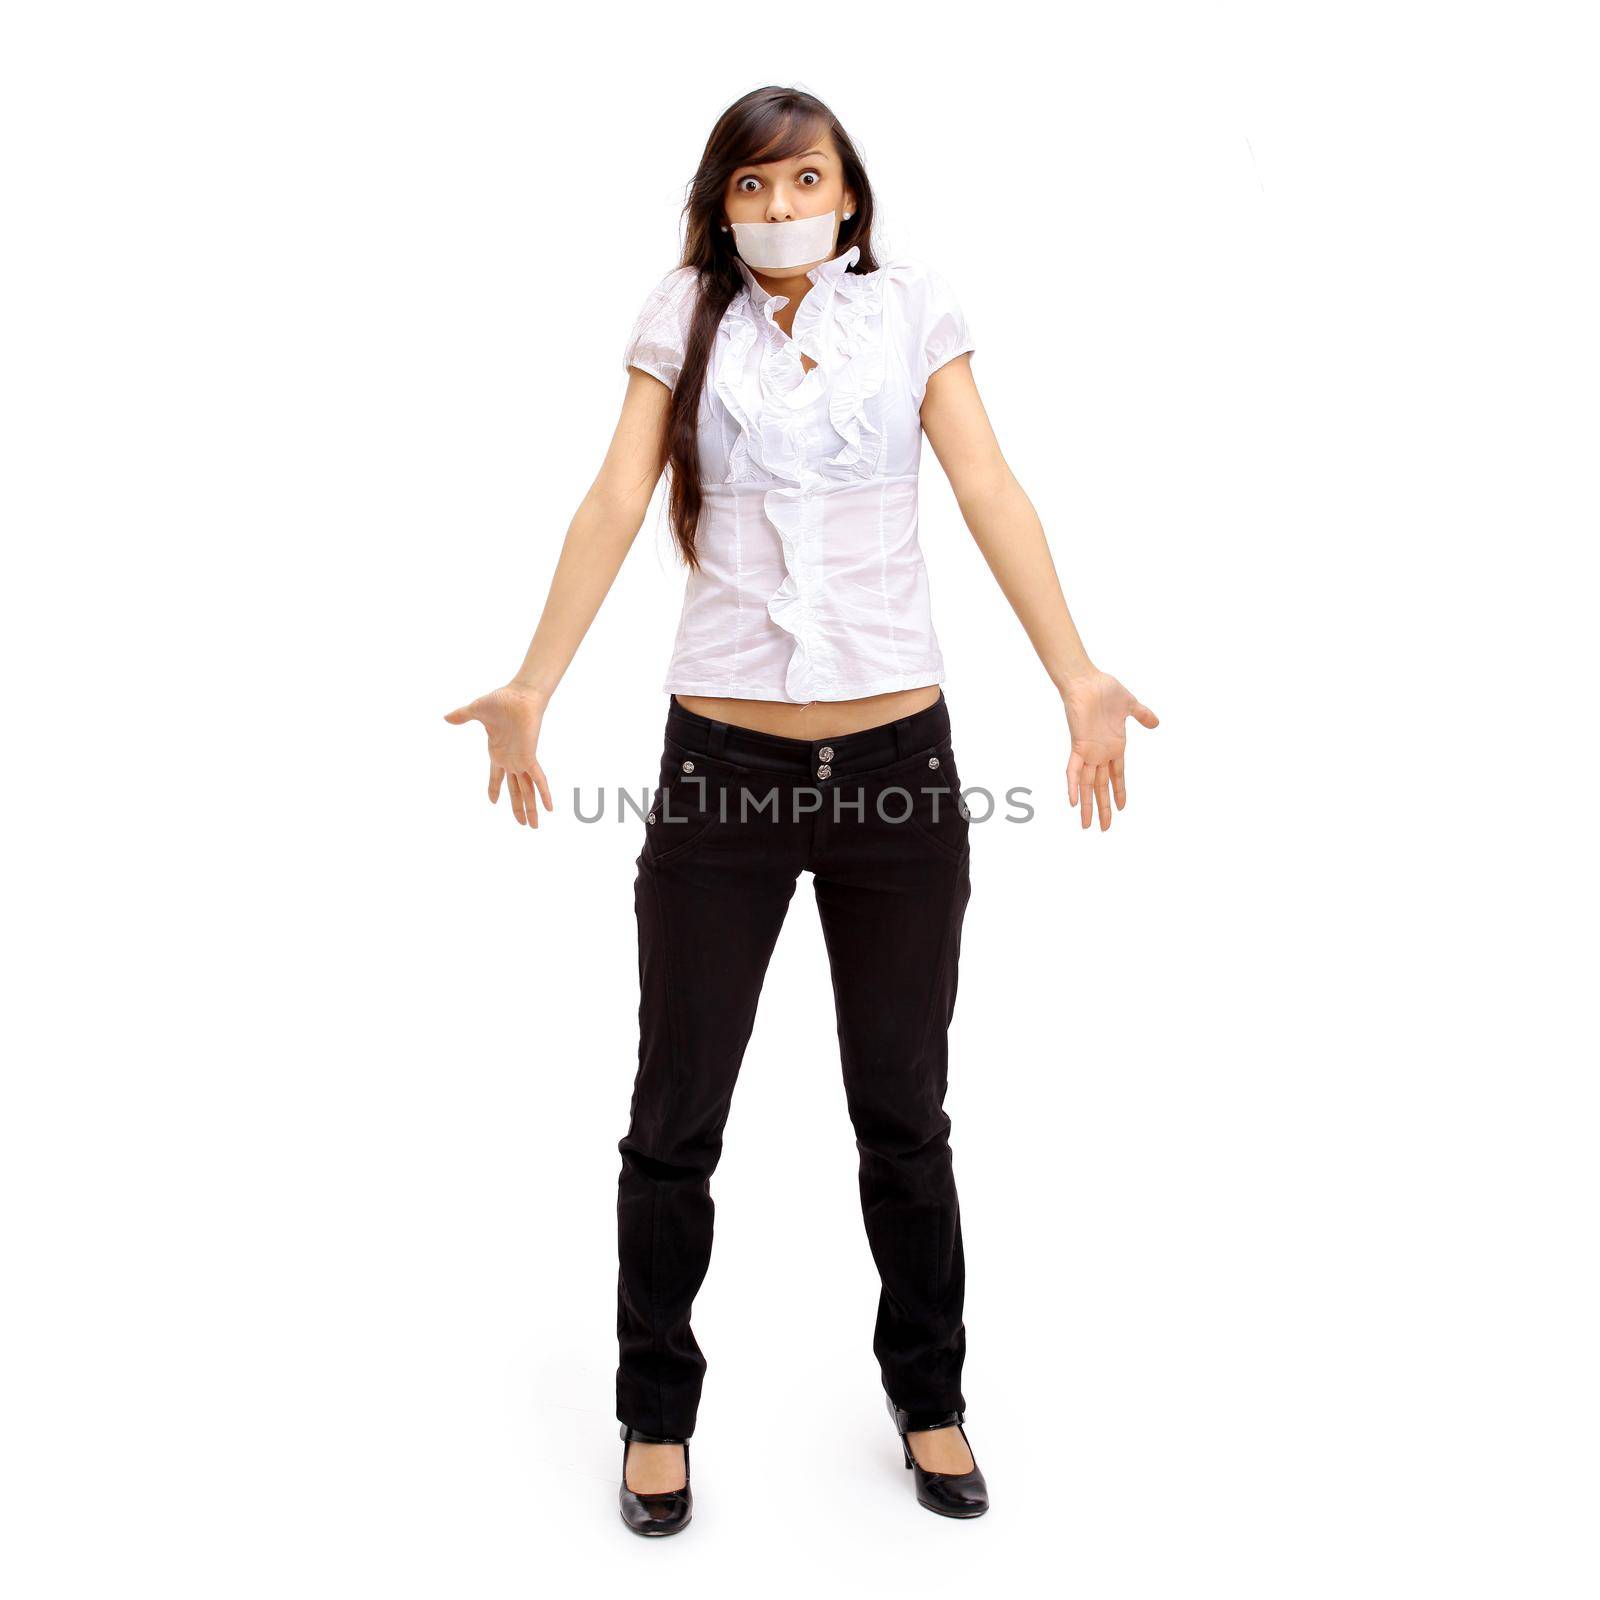 The beautiful business woman with the closed mouth on a white background